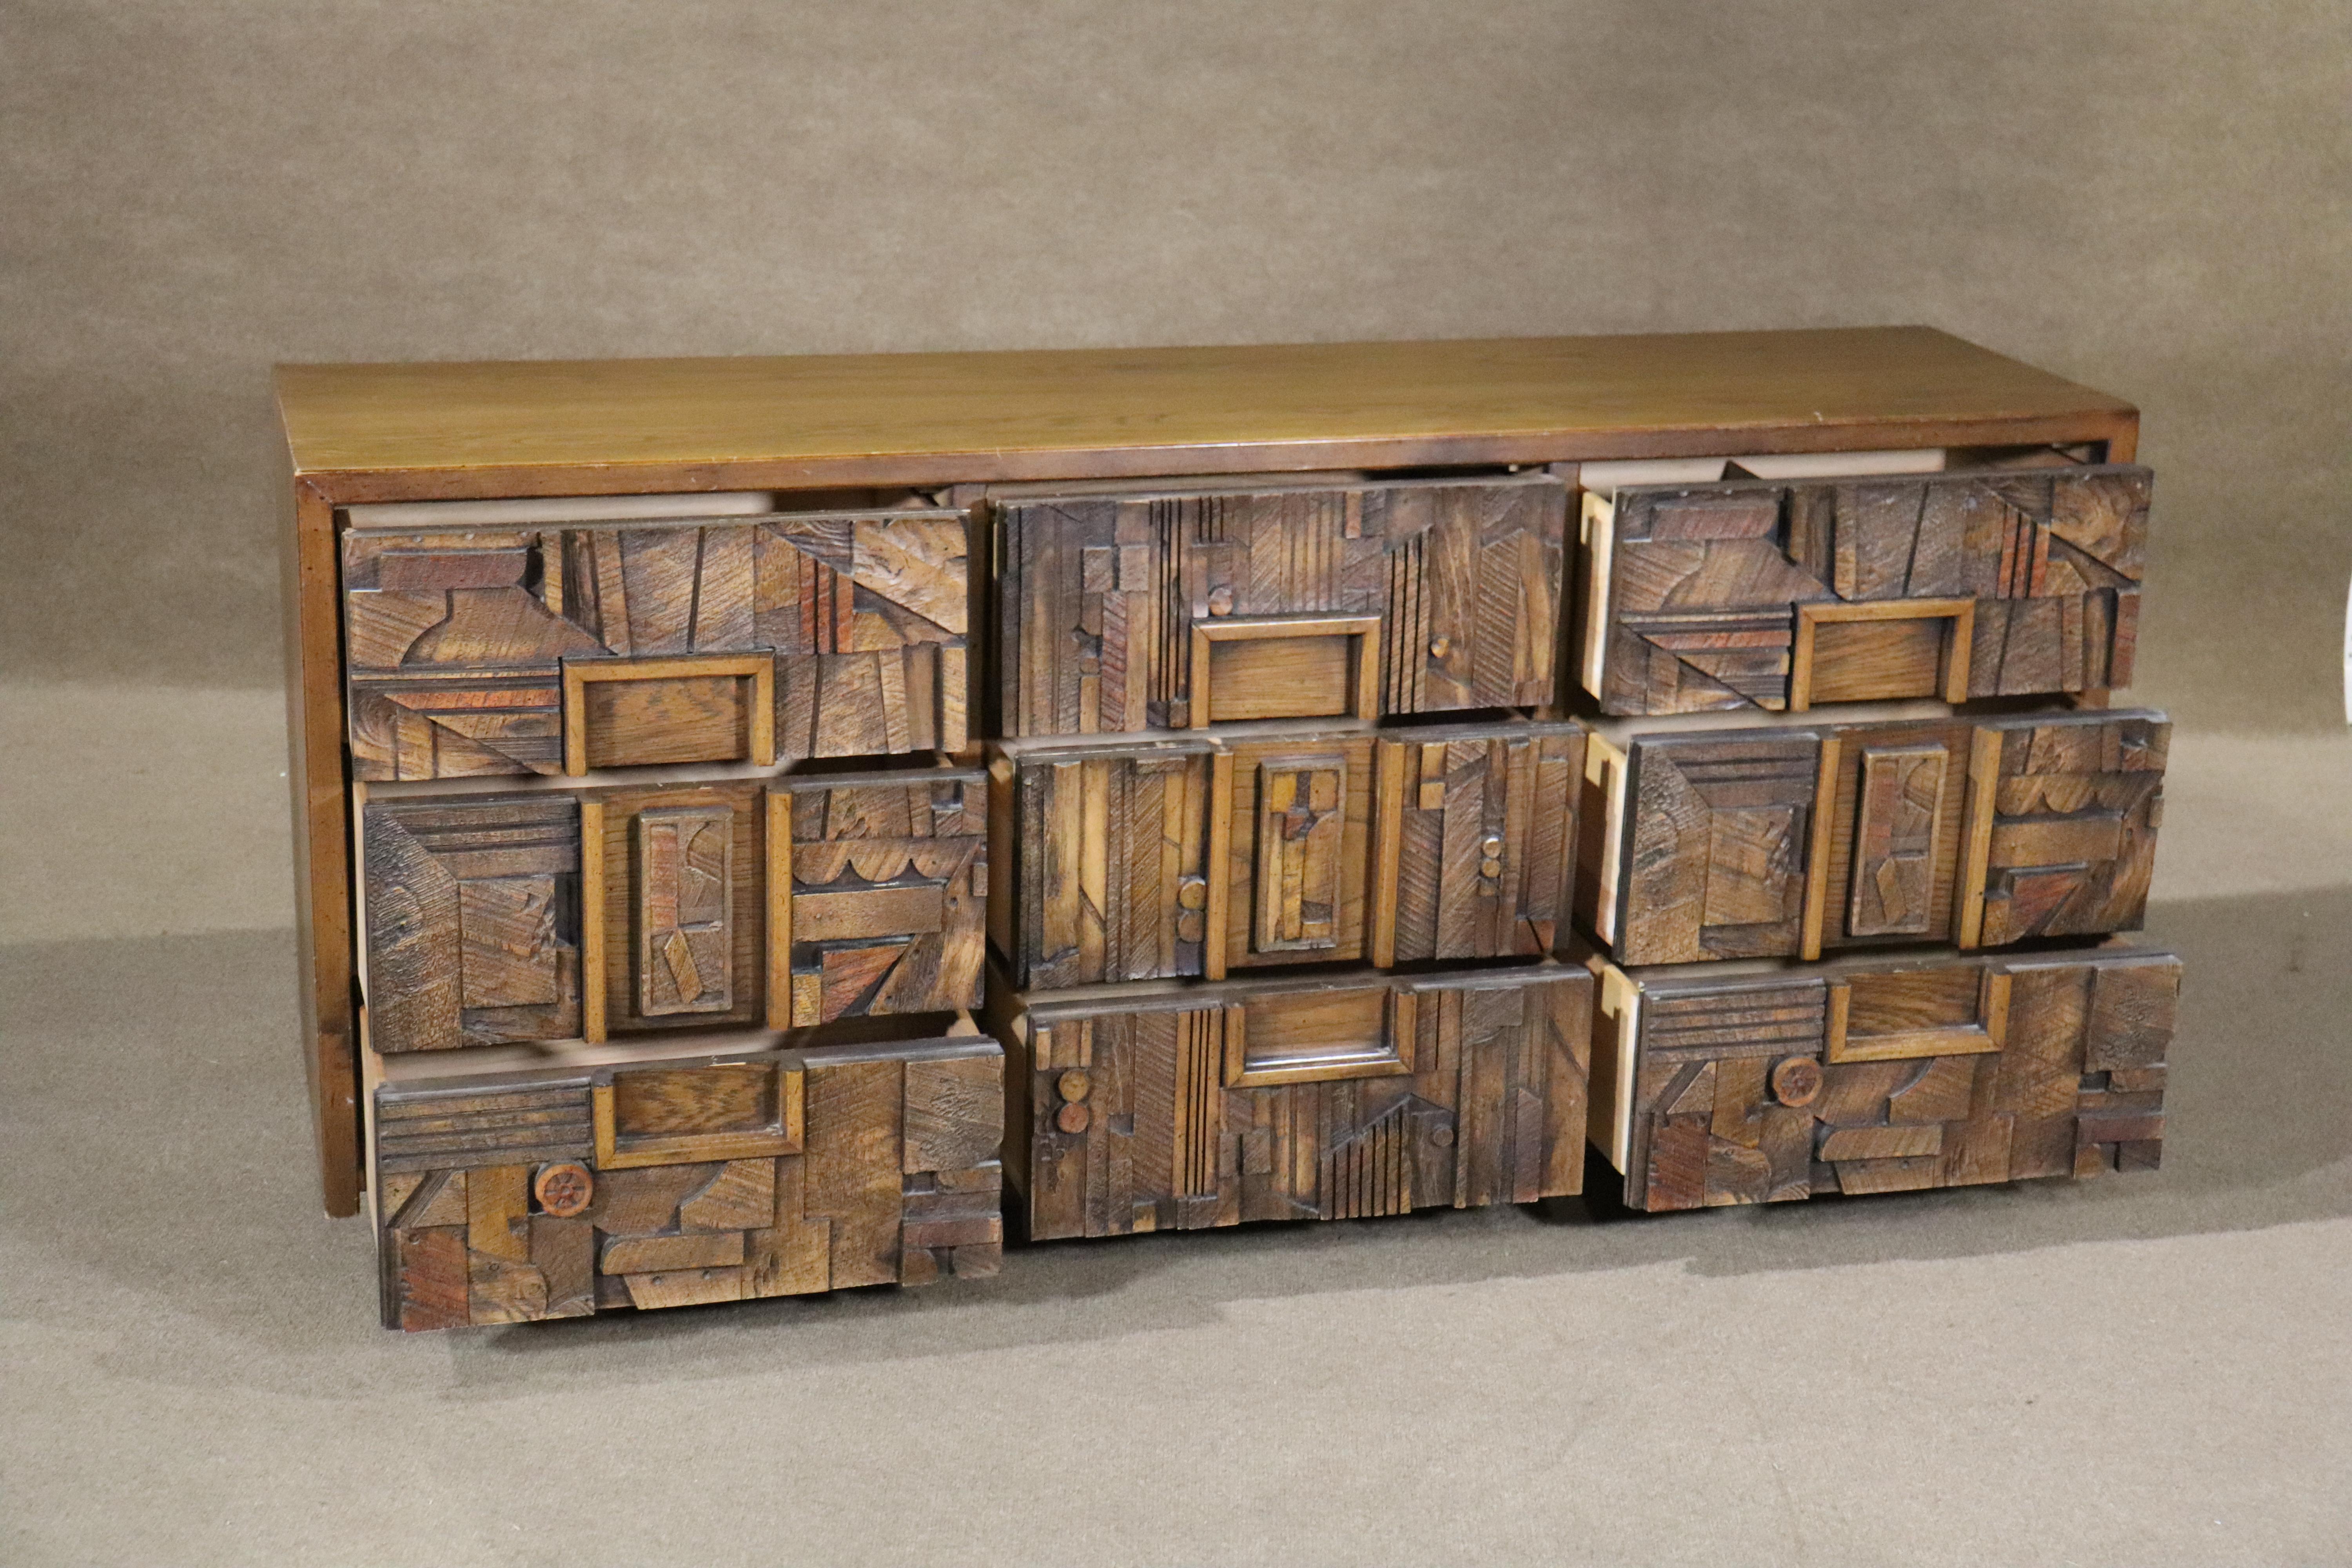 Long nine drawer dresser by Lane with a fantastic mosaic design front. This mid-century dresser features a brutalist style similar to Paul Evans.
Please confirm location NY or NJ